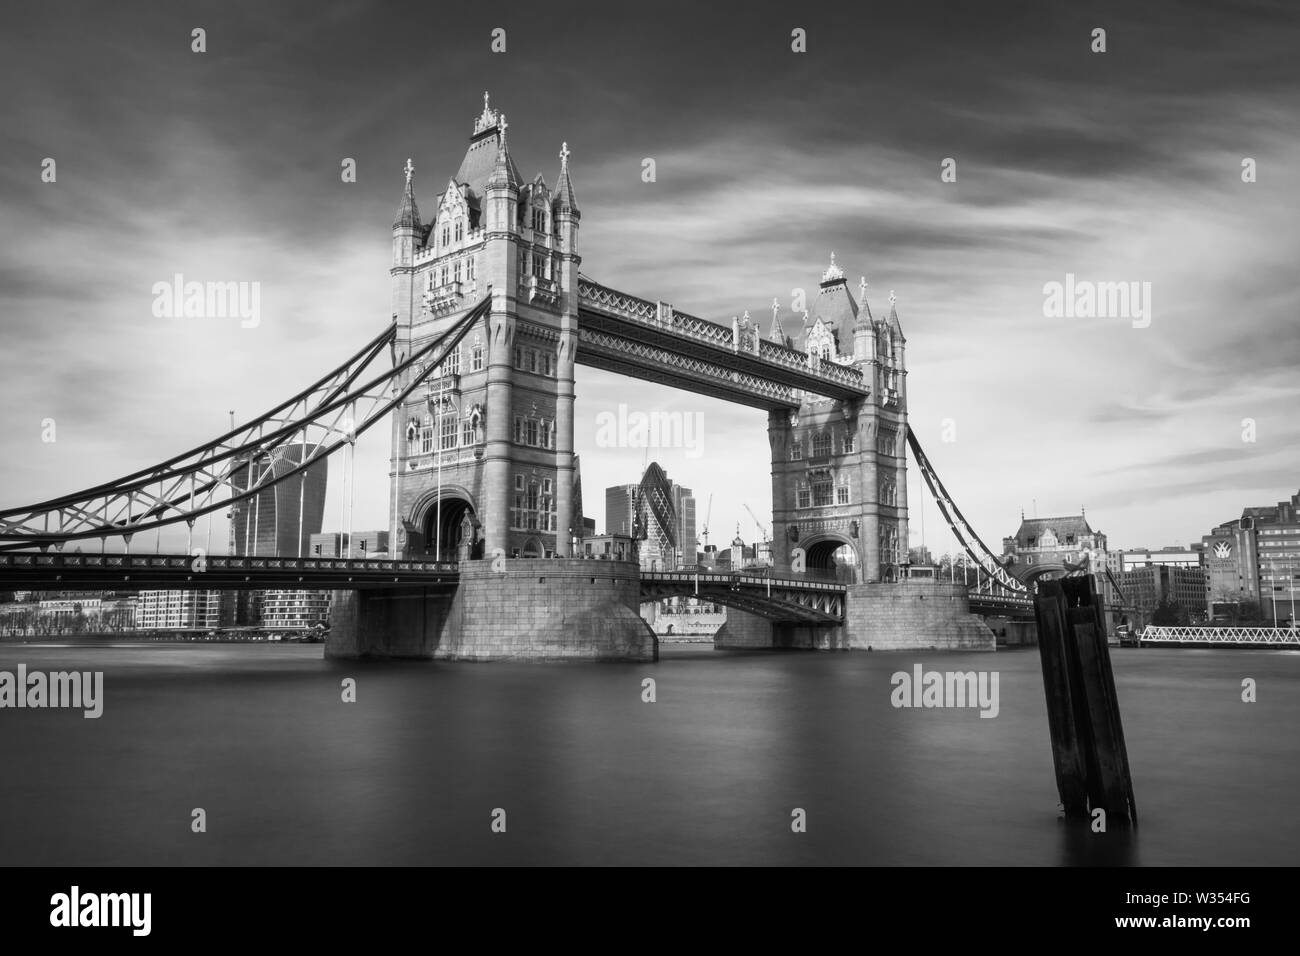 A black and white image of Tower Bridge in London taken with a long exposure Stock Photo